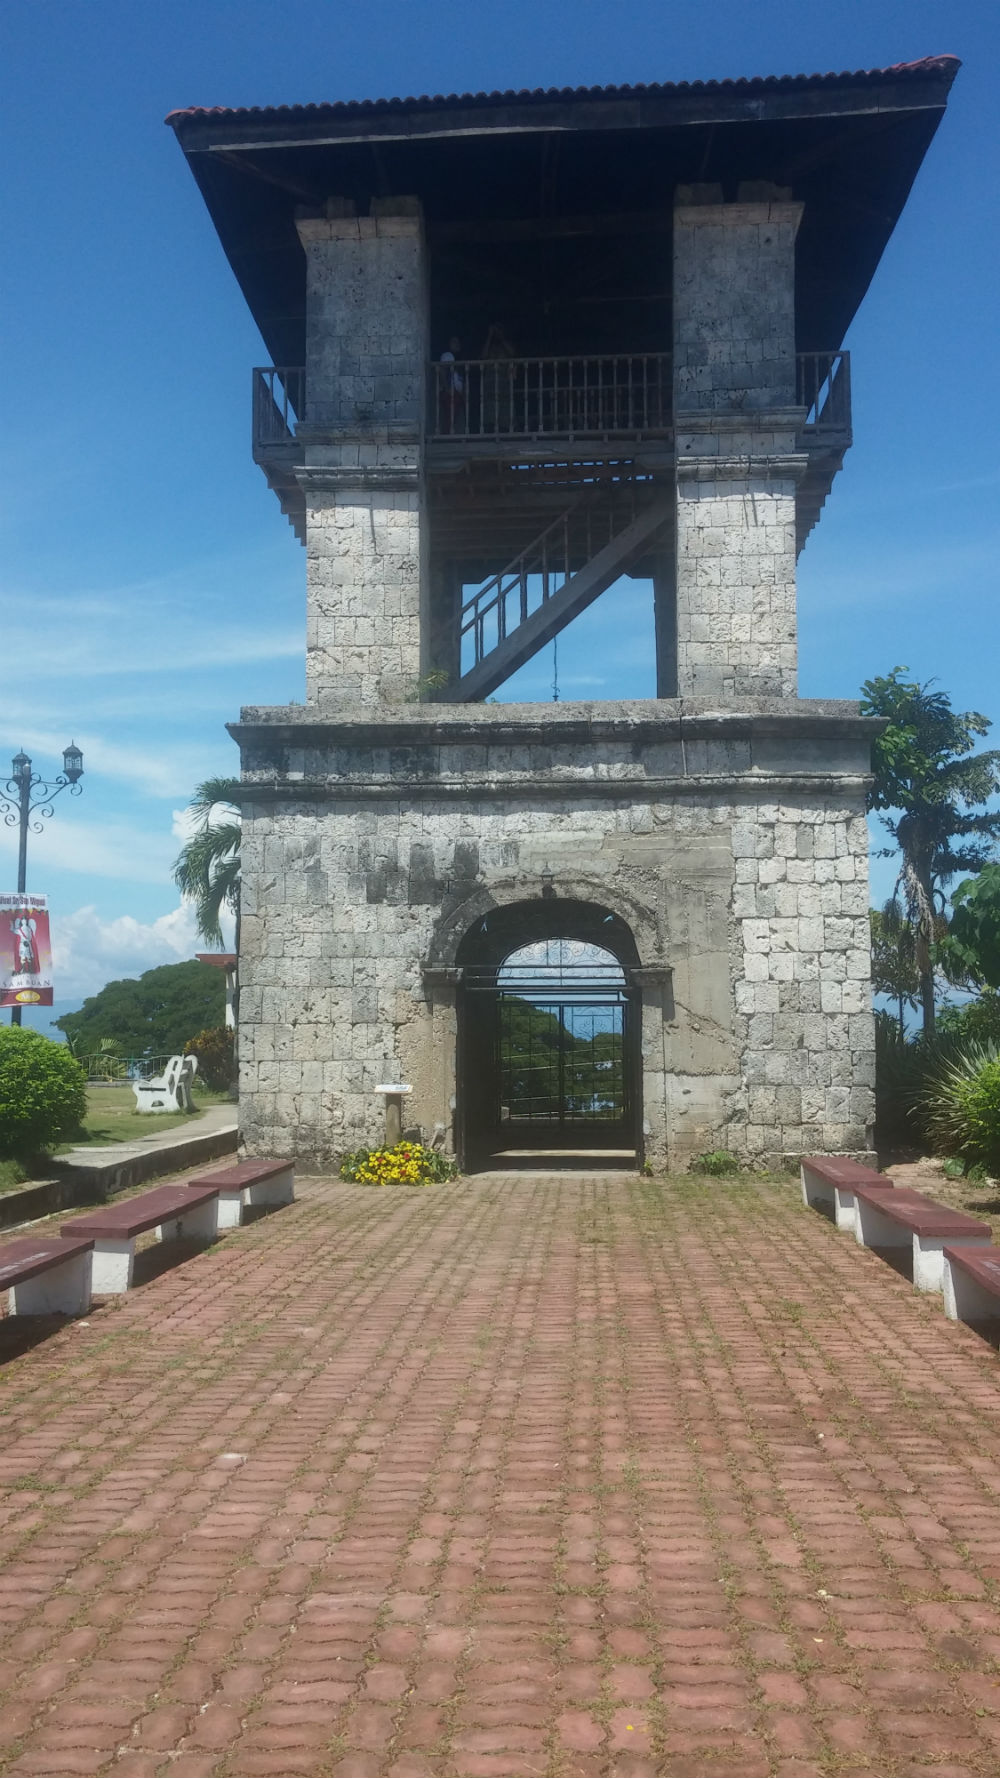 A painstaking restoration of the original watchtower, the Campanario de Antigua in Samboan formed part of a series of fortifications in southern Cebu aimed at providing coastal settlements early warning of pirate raids during the Spanish colonial era.